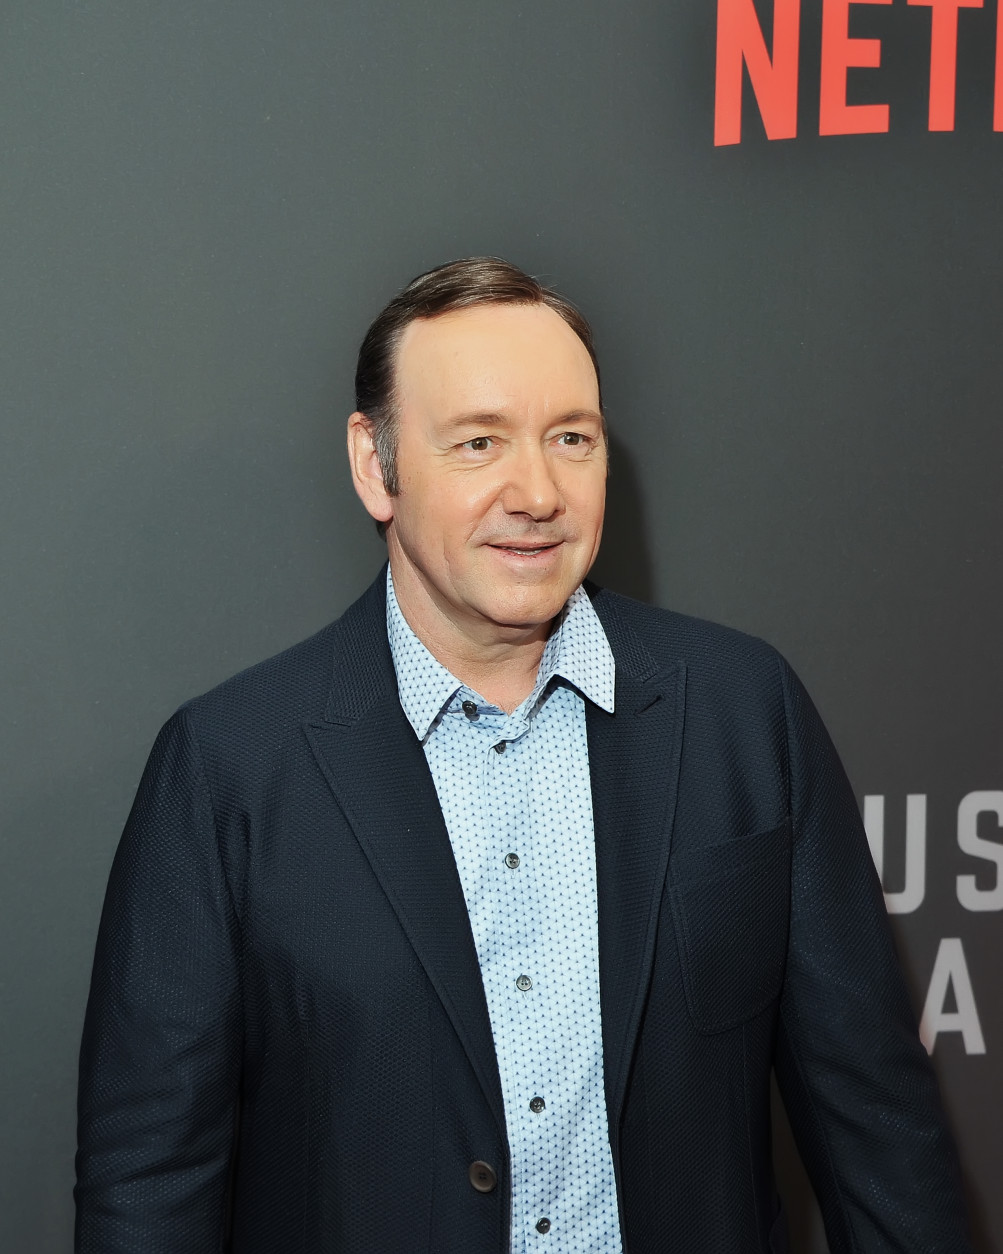 Kevin Spacey pictured at the “House of Cards” Season 4 premiere on Feb. 22, 2016.  (Courtesy Shannon Finney, www.shannonfinneyphotography.com)